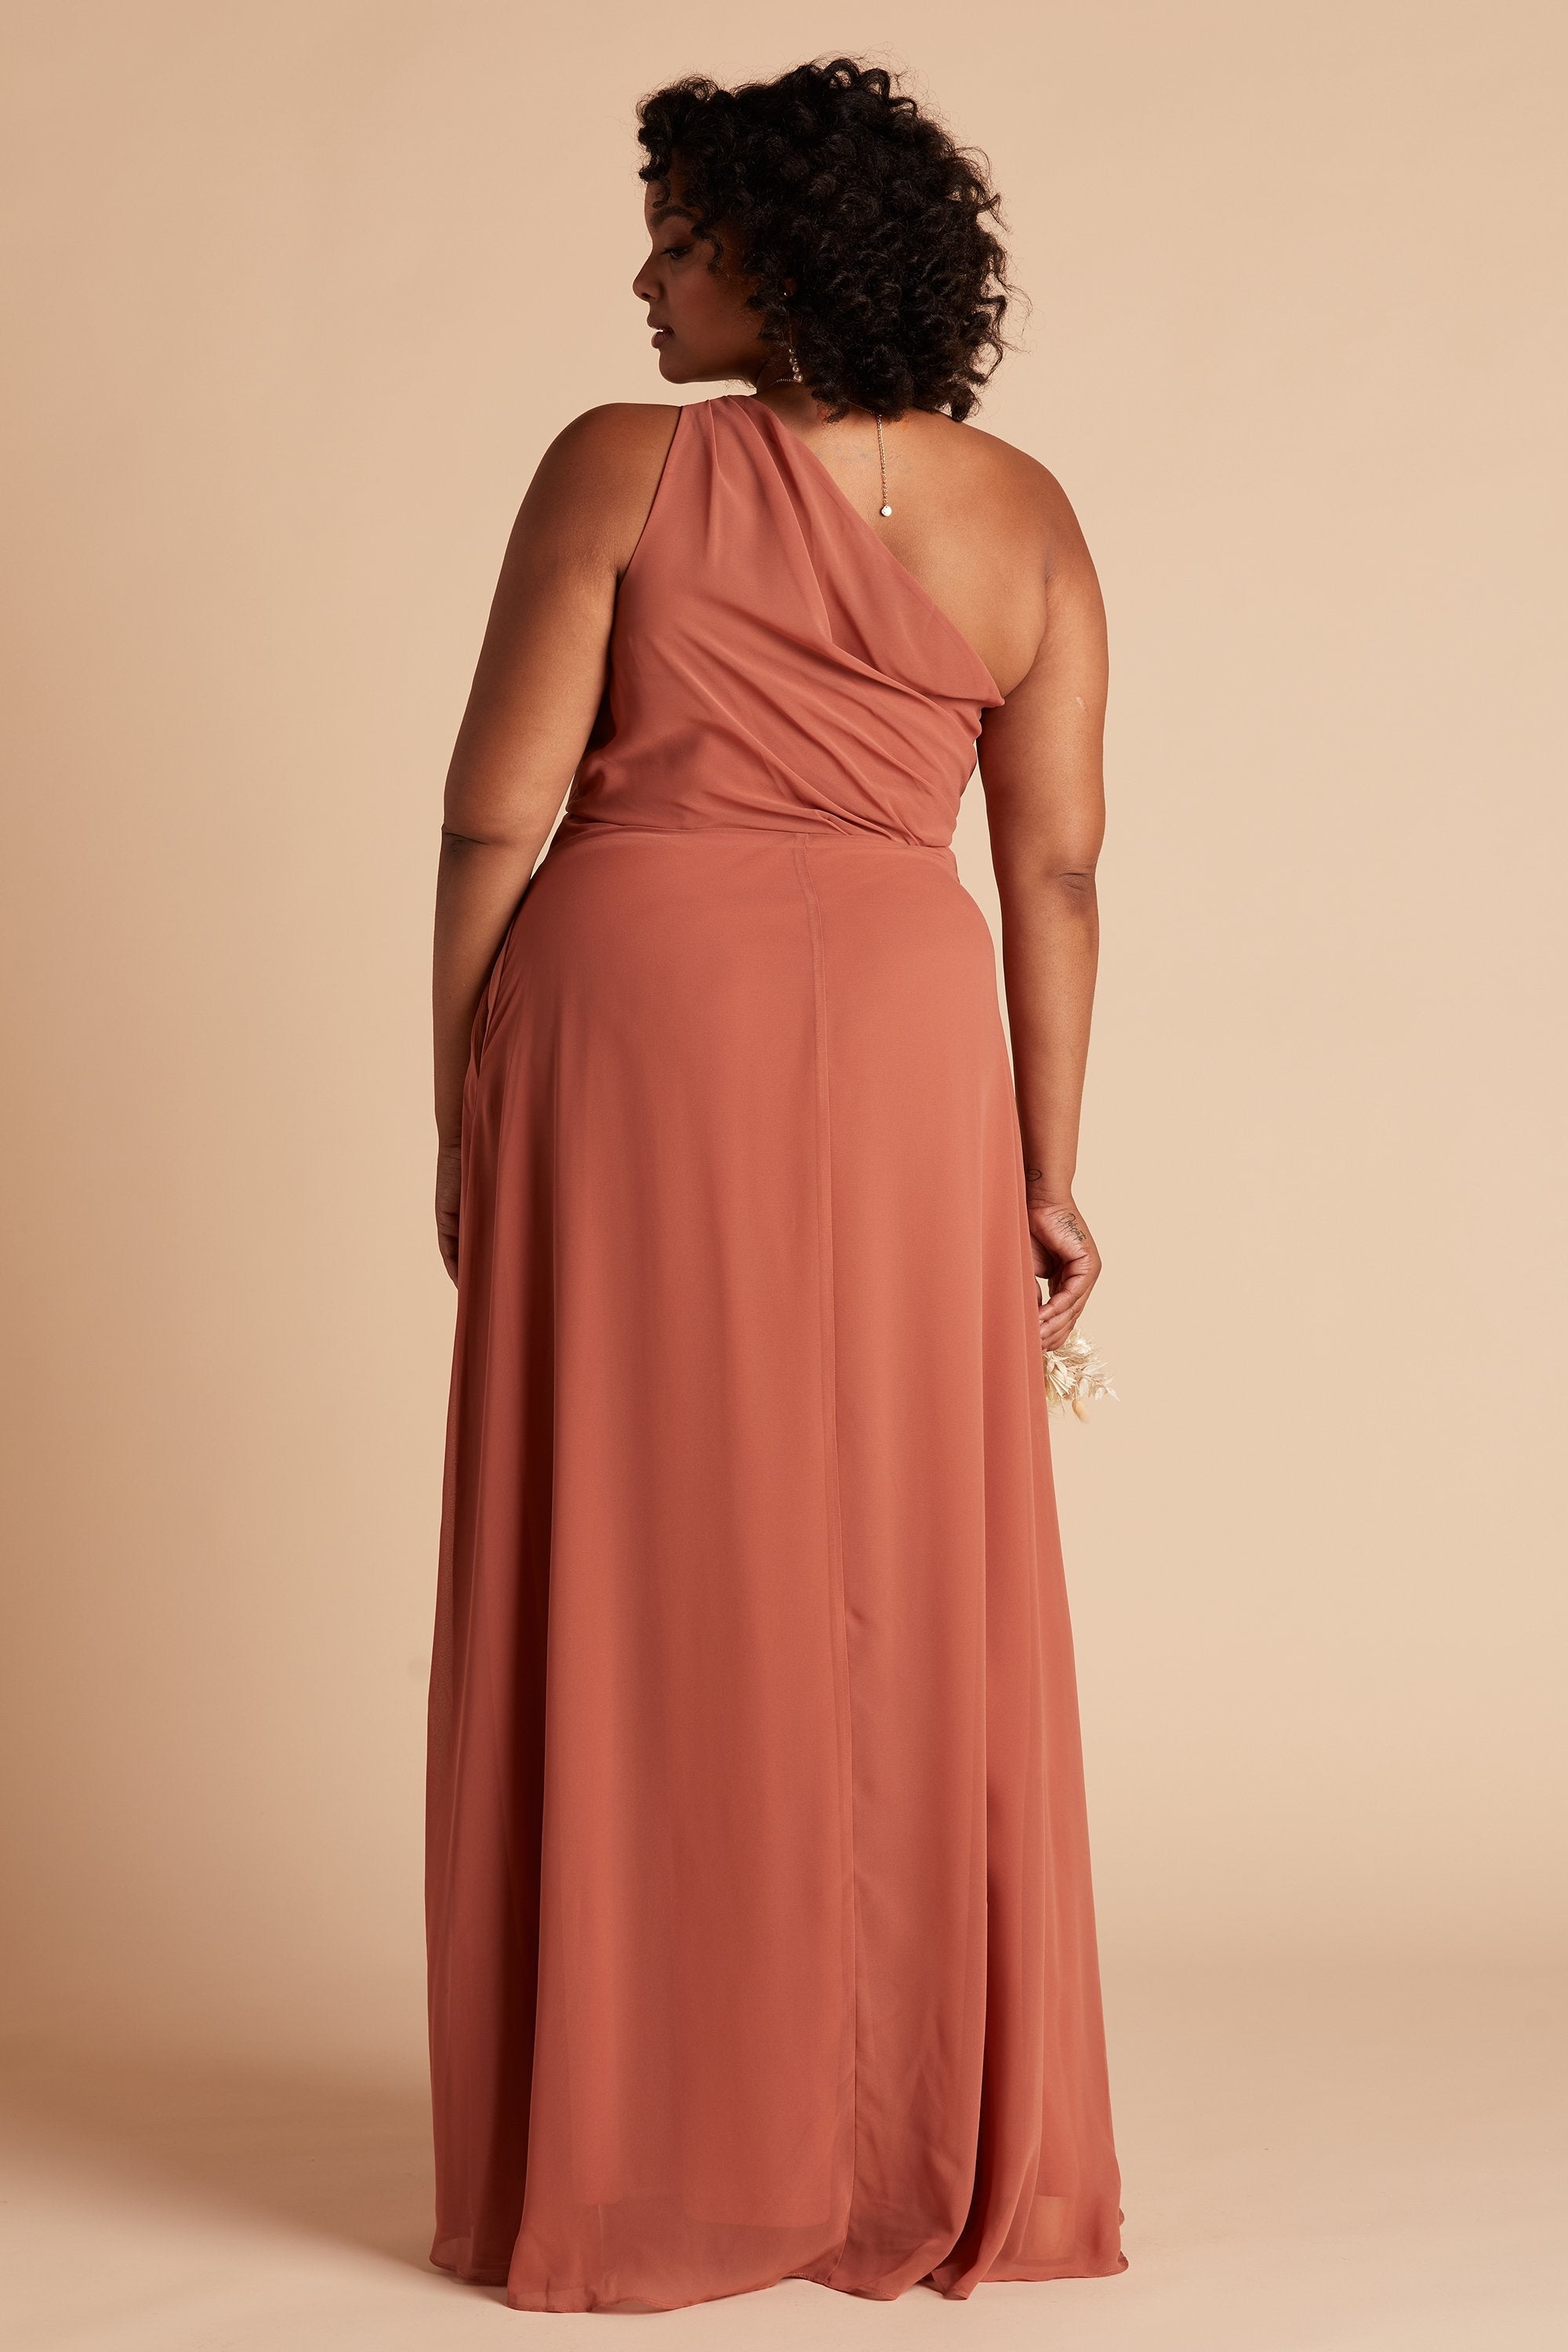 Back view of the Kira Dress Curve in terracotta chiffon shows a full-figured model with a medium skin tone. The back of the dress has sheer chiffon fabric which creates a pleated Grecian one-shoulder neckline and bodice. 